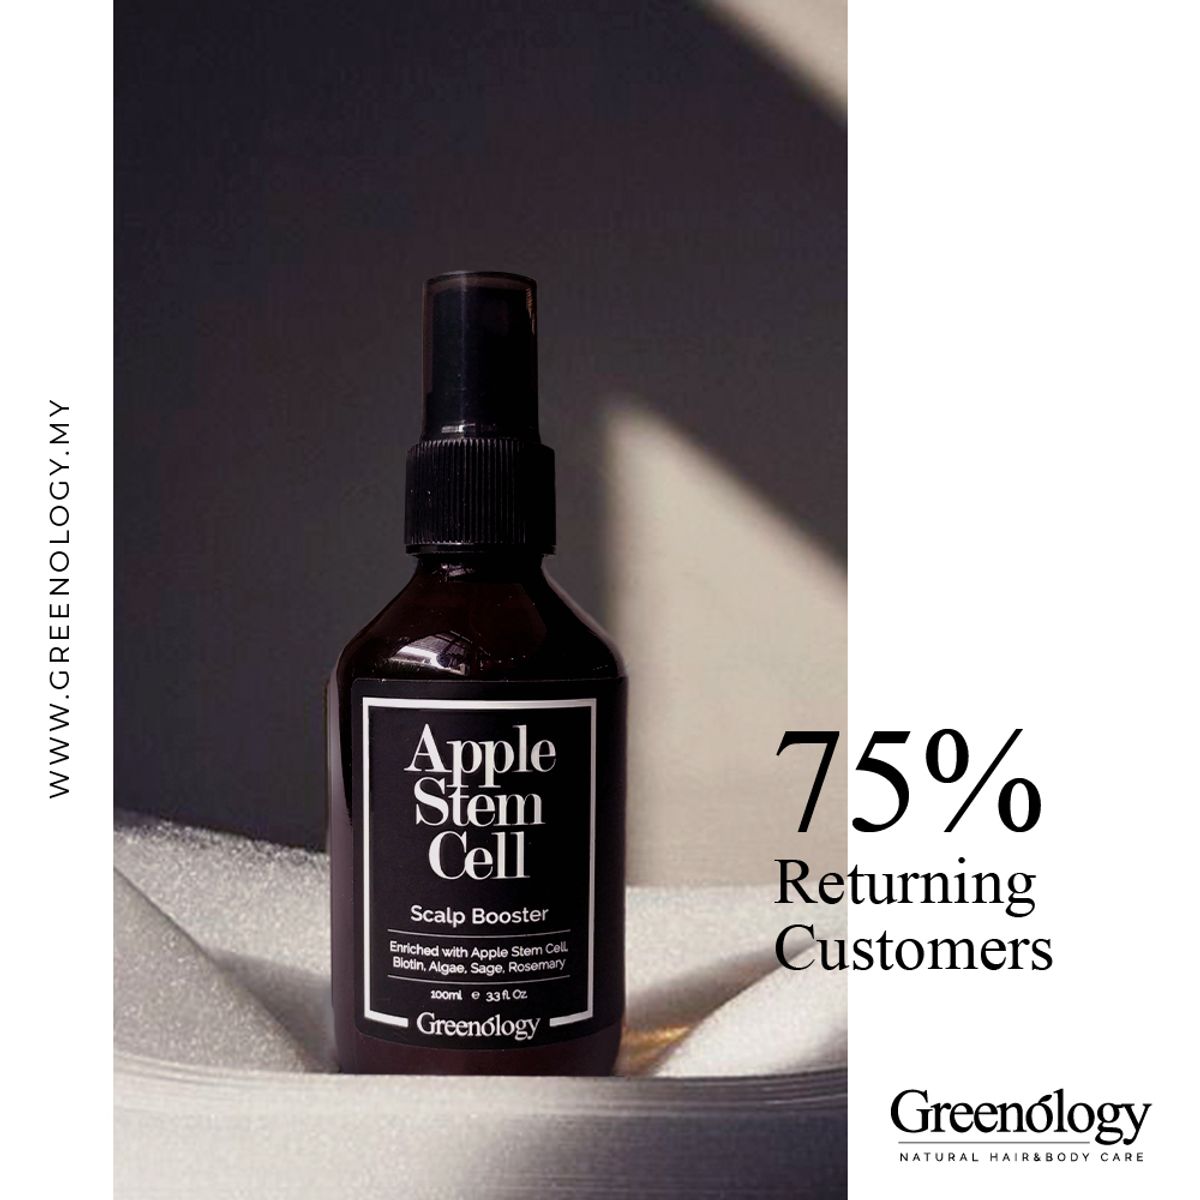 Apple Stem Cell Scalp Booster with 75% Returning Customers